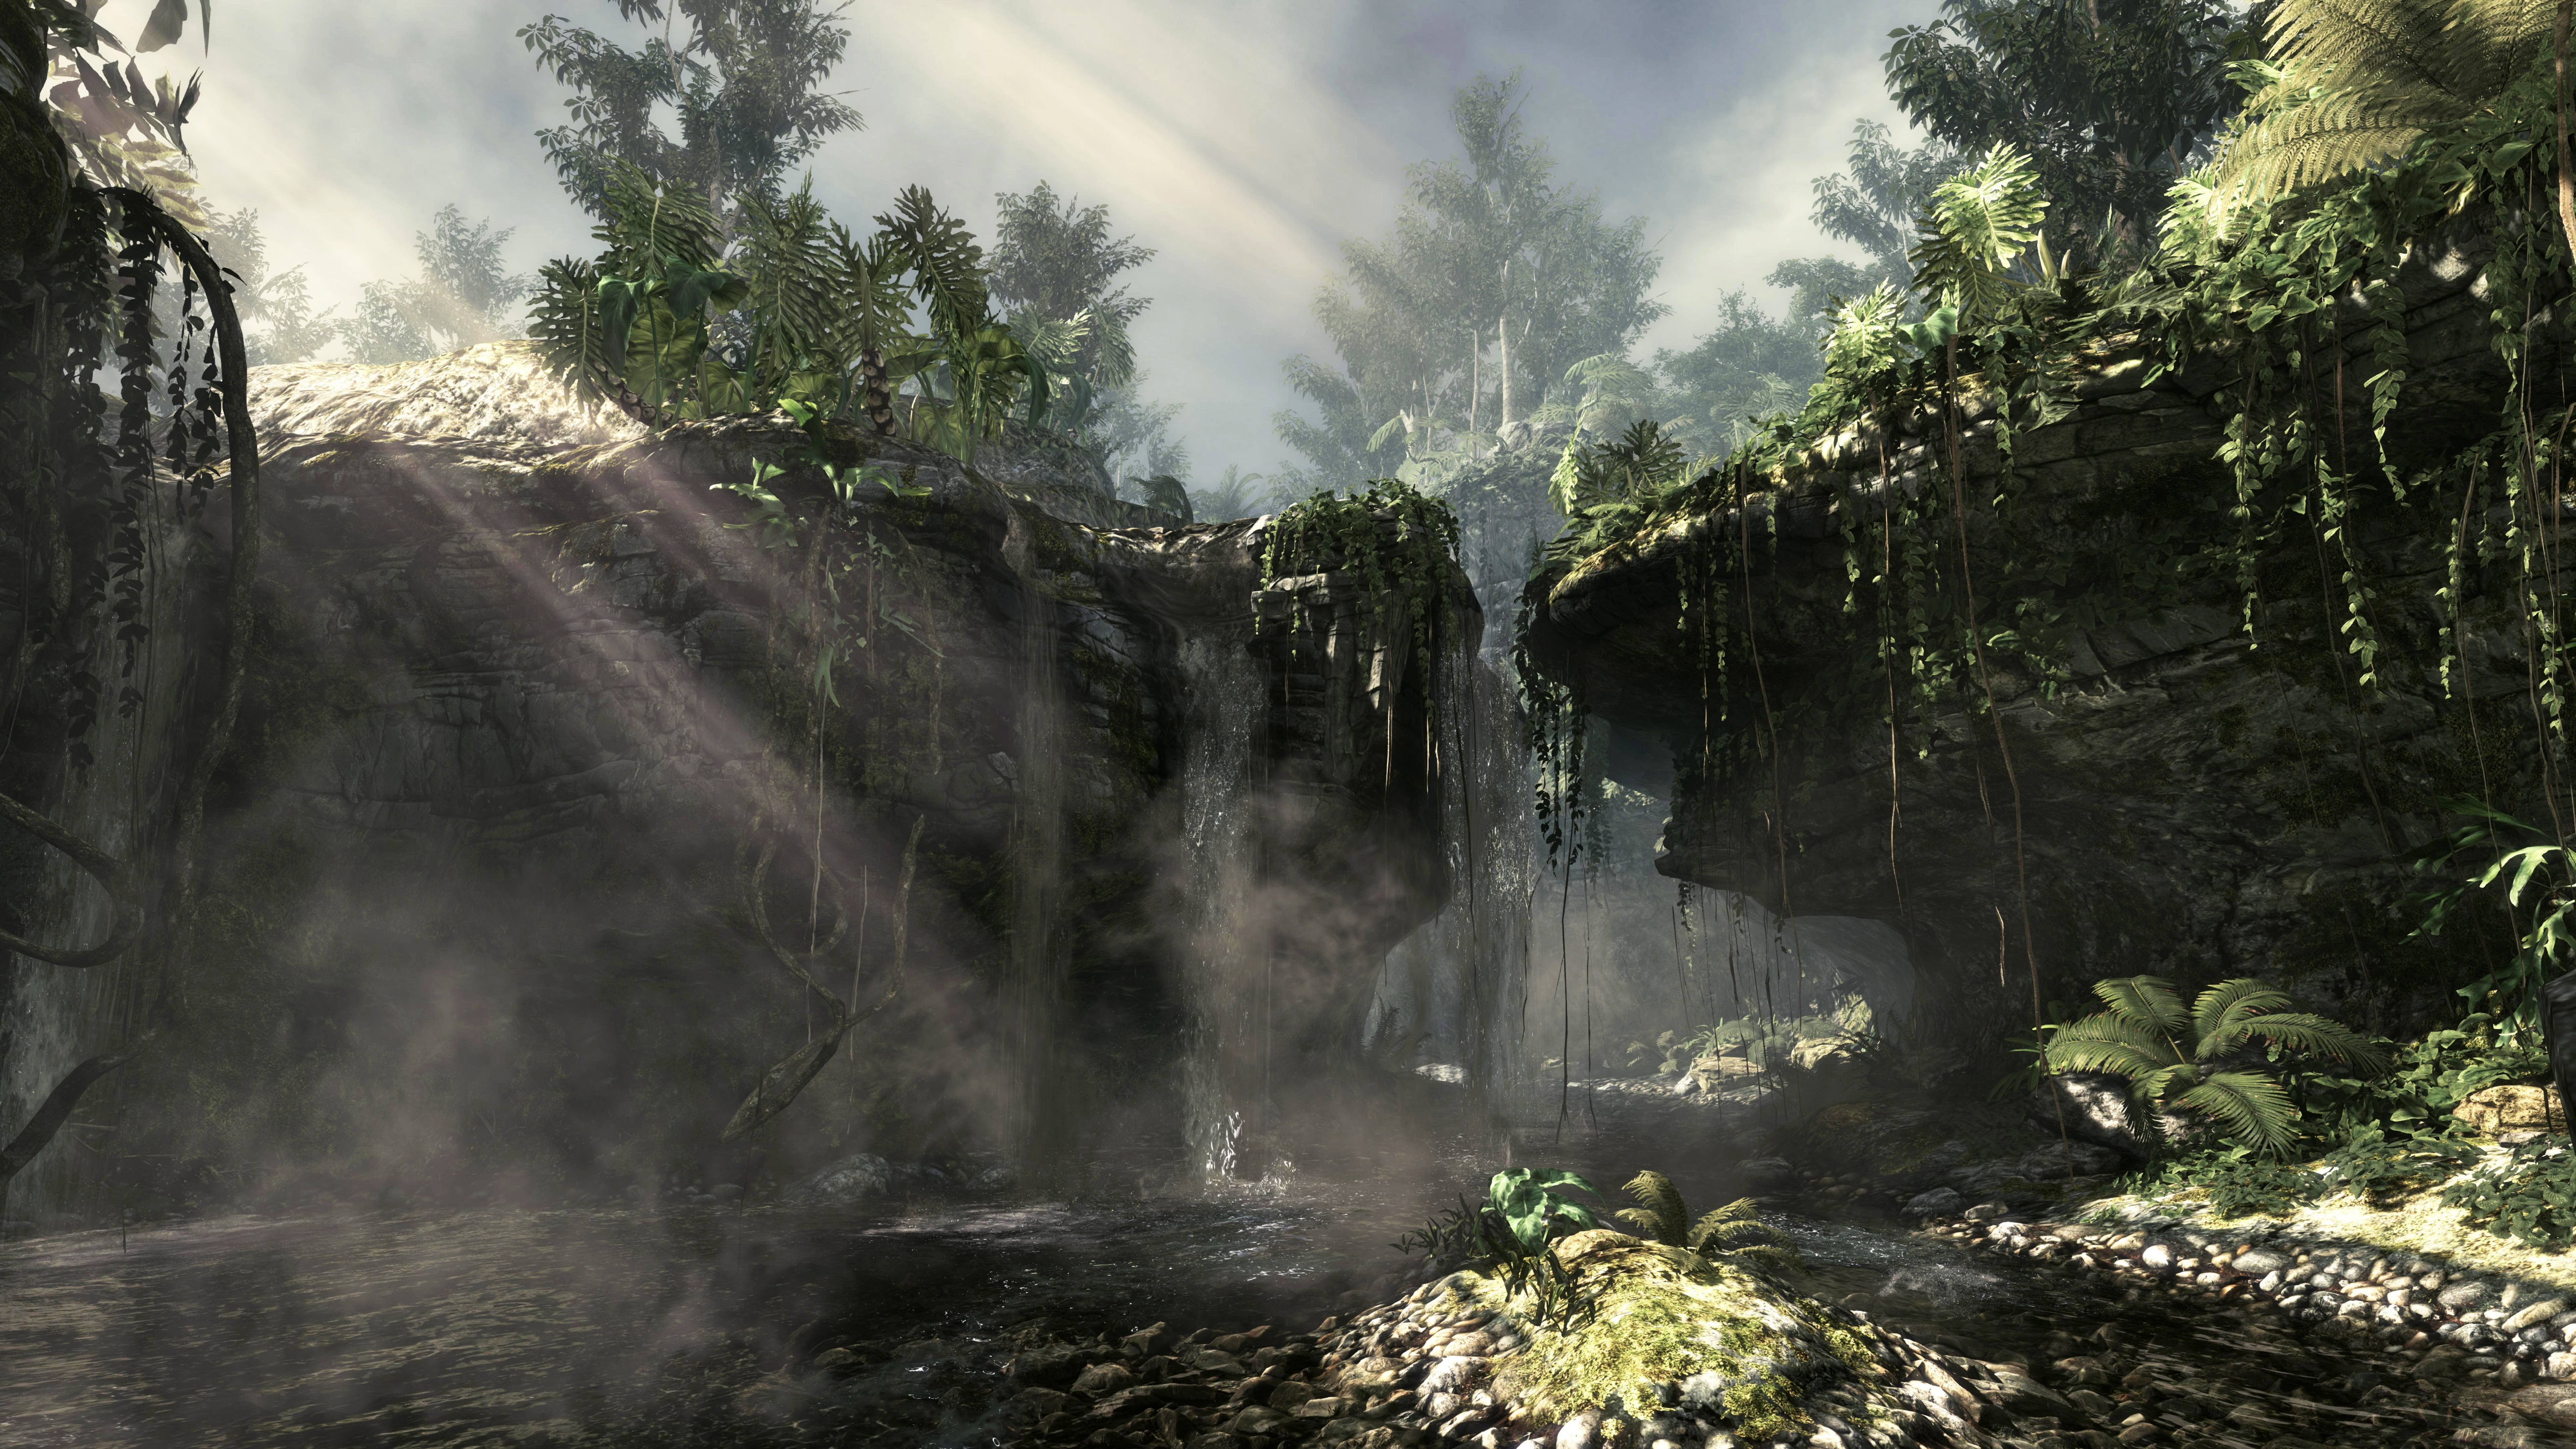 Call of Duty Ghosts, Call of Duty Black Ops Ii, Activision, Infinity Ward, Vegetation. Wallpaper in 7680x4320 Resolution